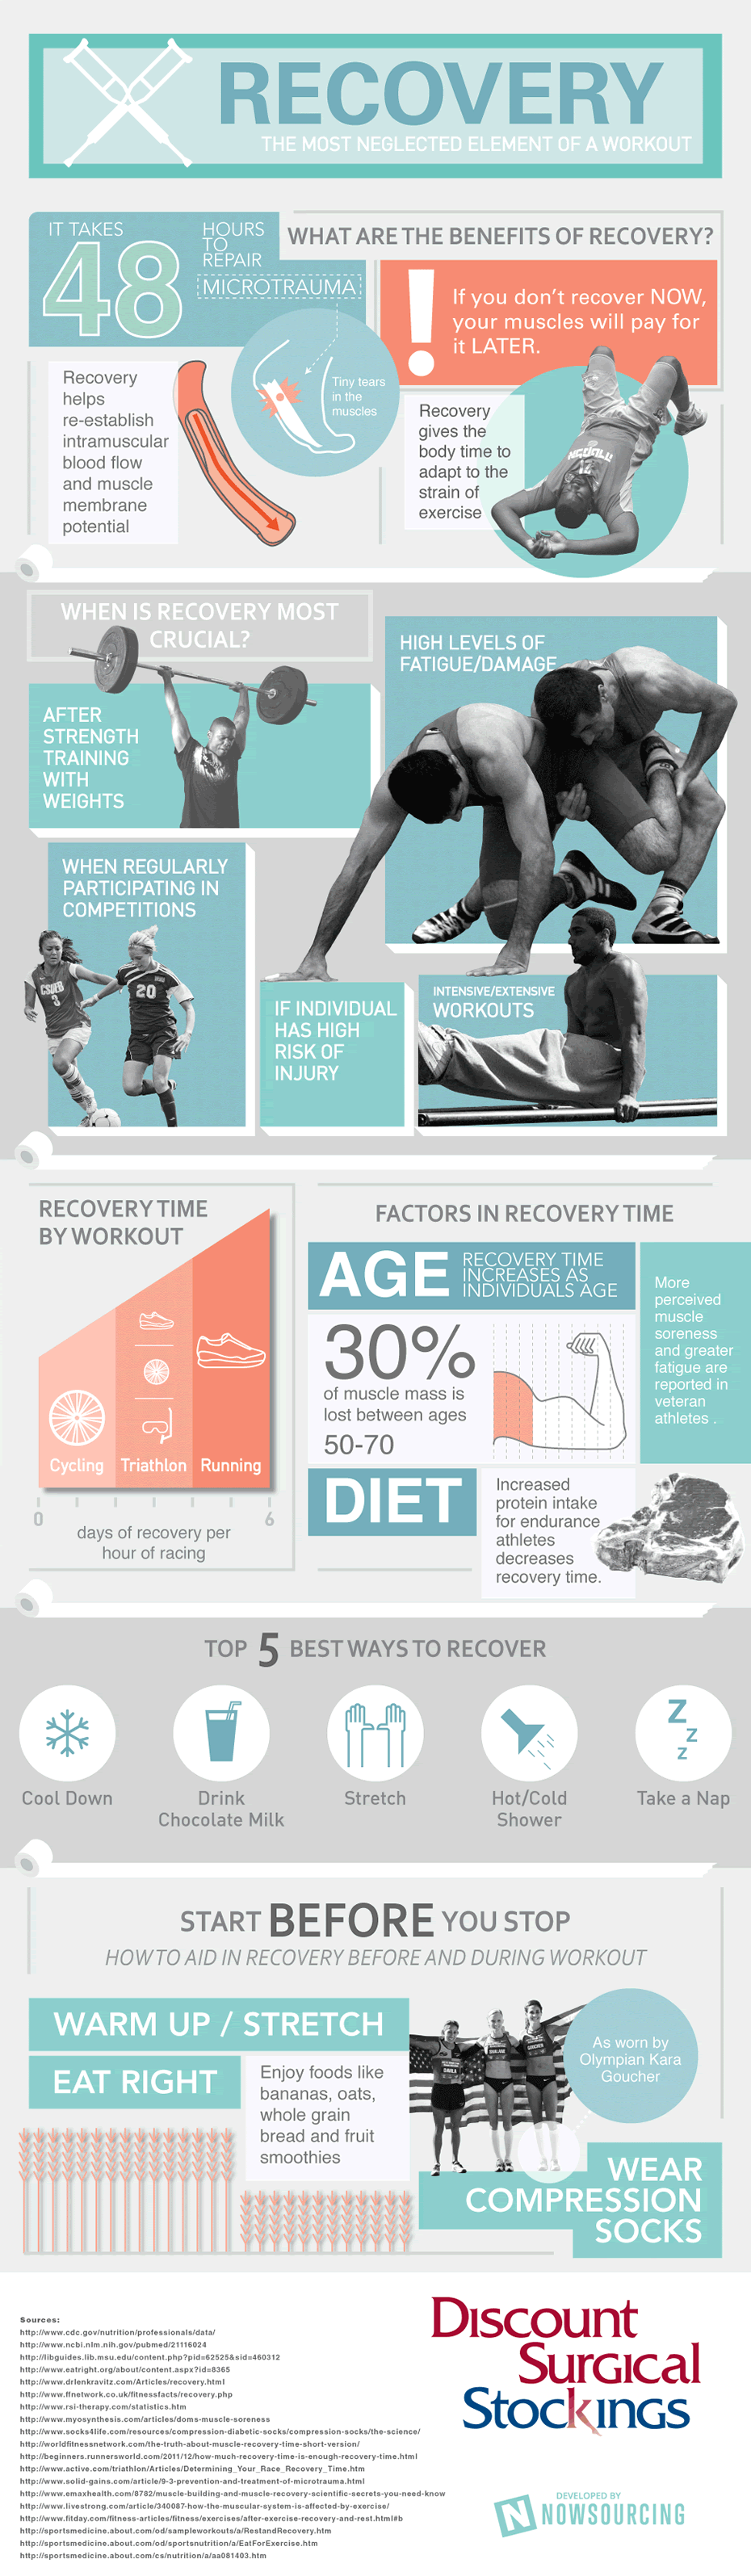 Workout Recovery Importance-Infographic